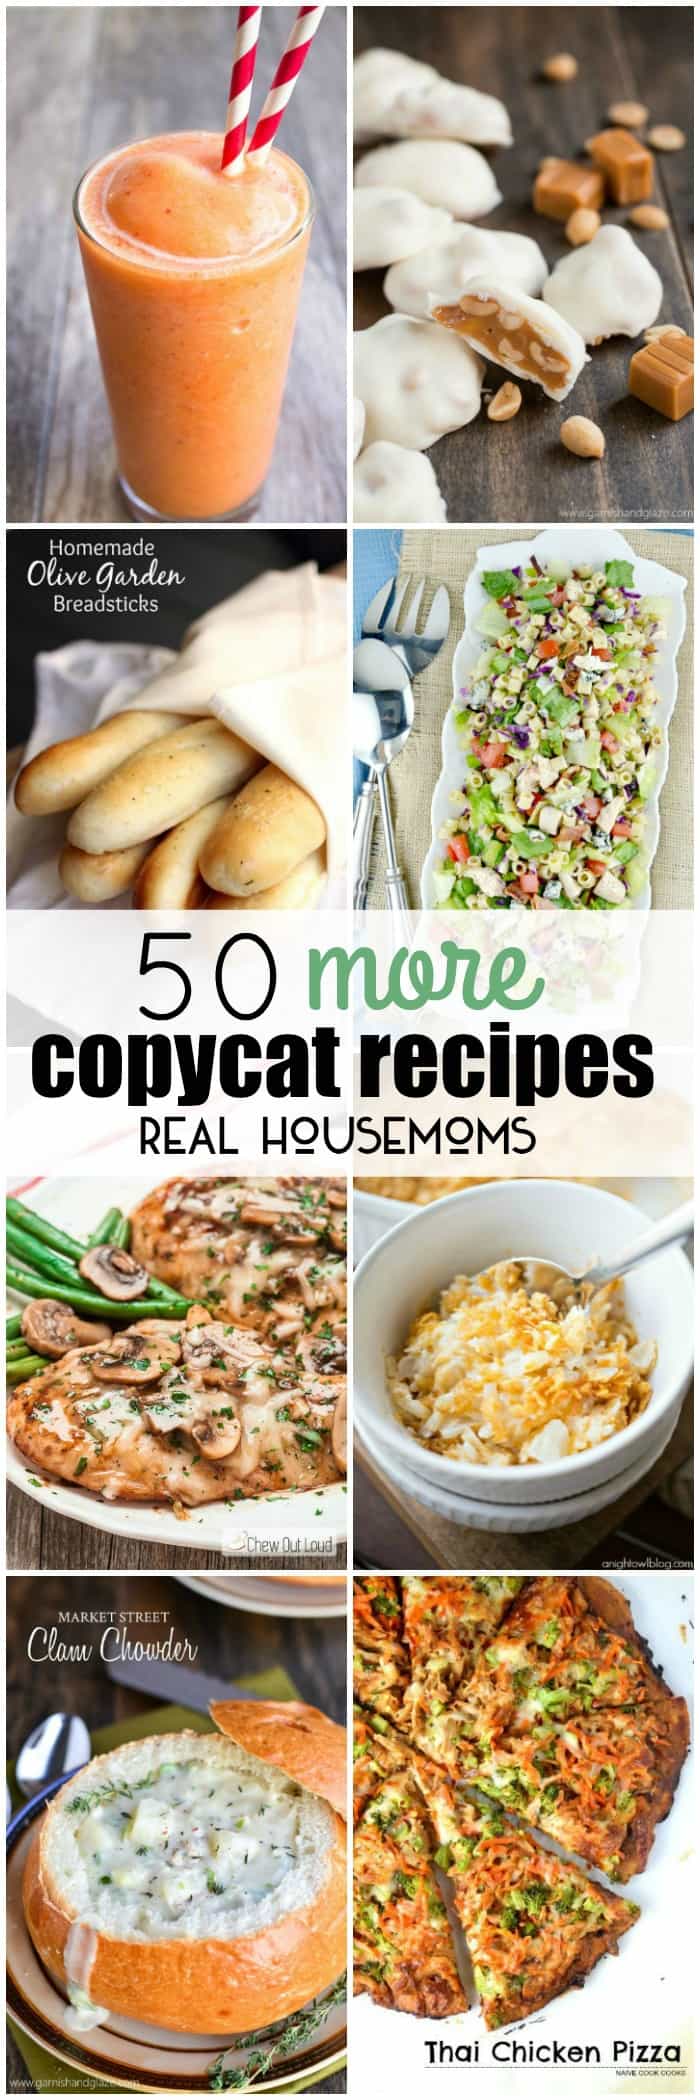 Bring your favorite restaurant flavors home! We've rounded up 50 MORE COPYCAT RECIPES that'll save you money and satisfy your cravings!